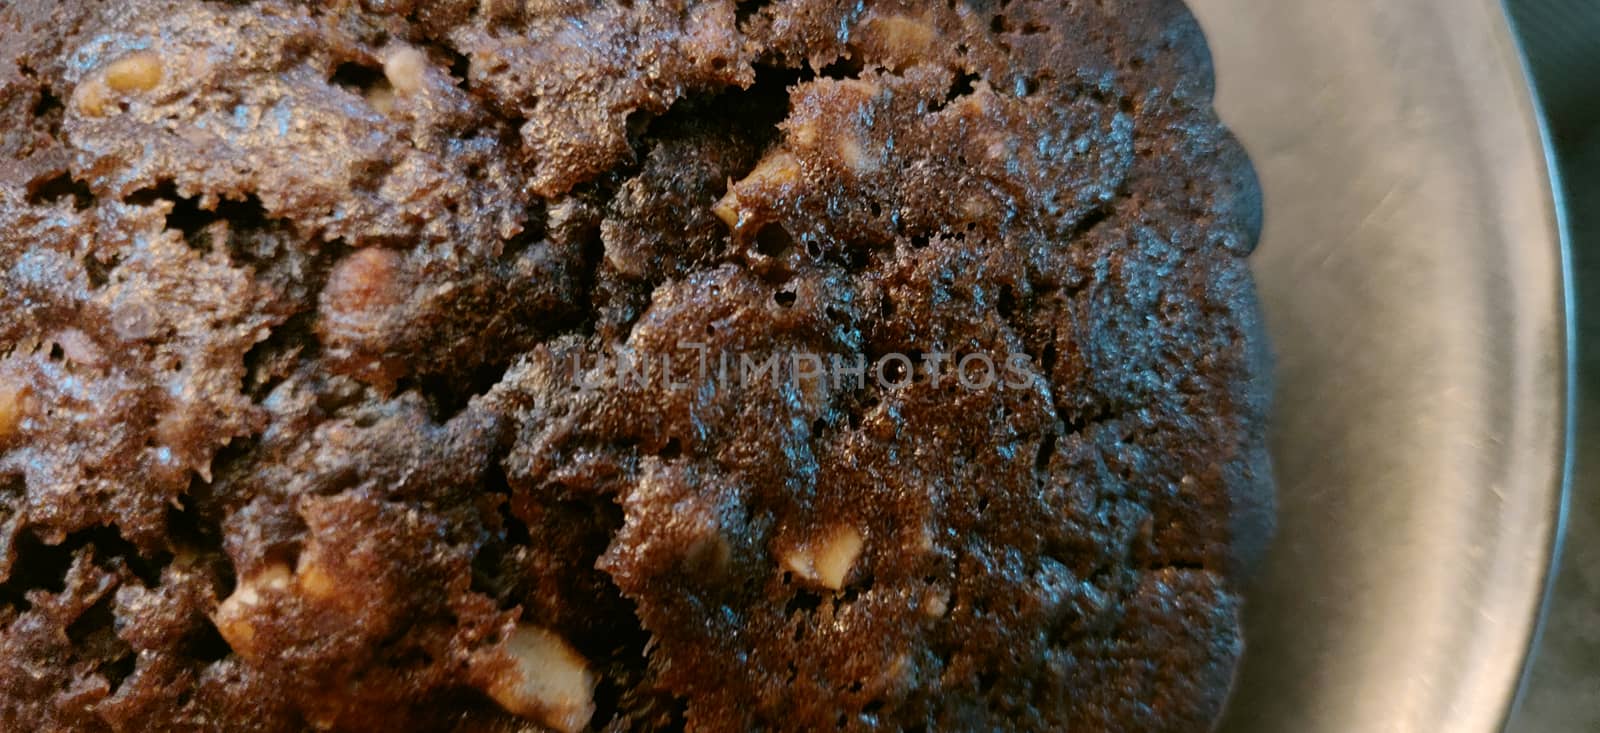 An extreme close up of chocolate walnut muffin on a steel plate by mshivangi92